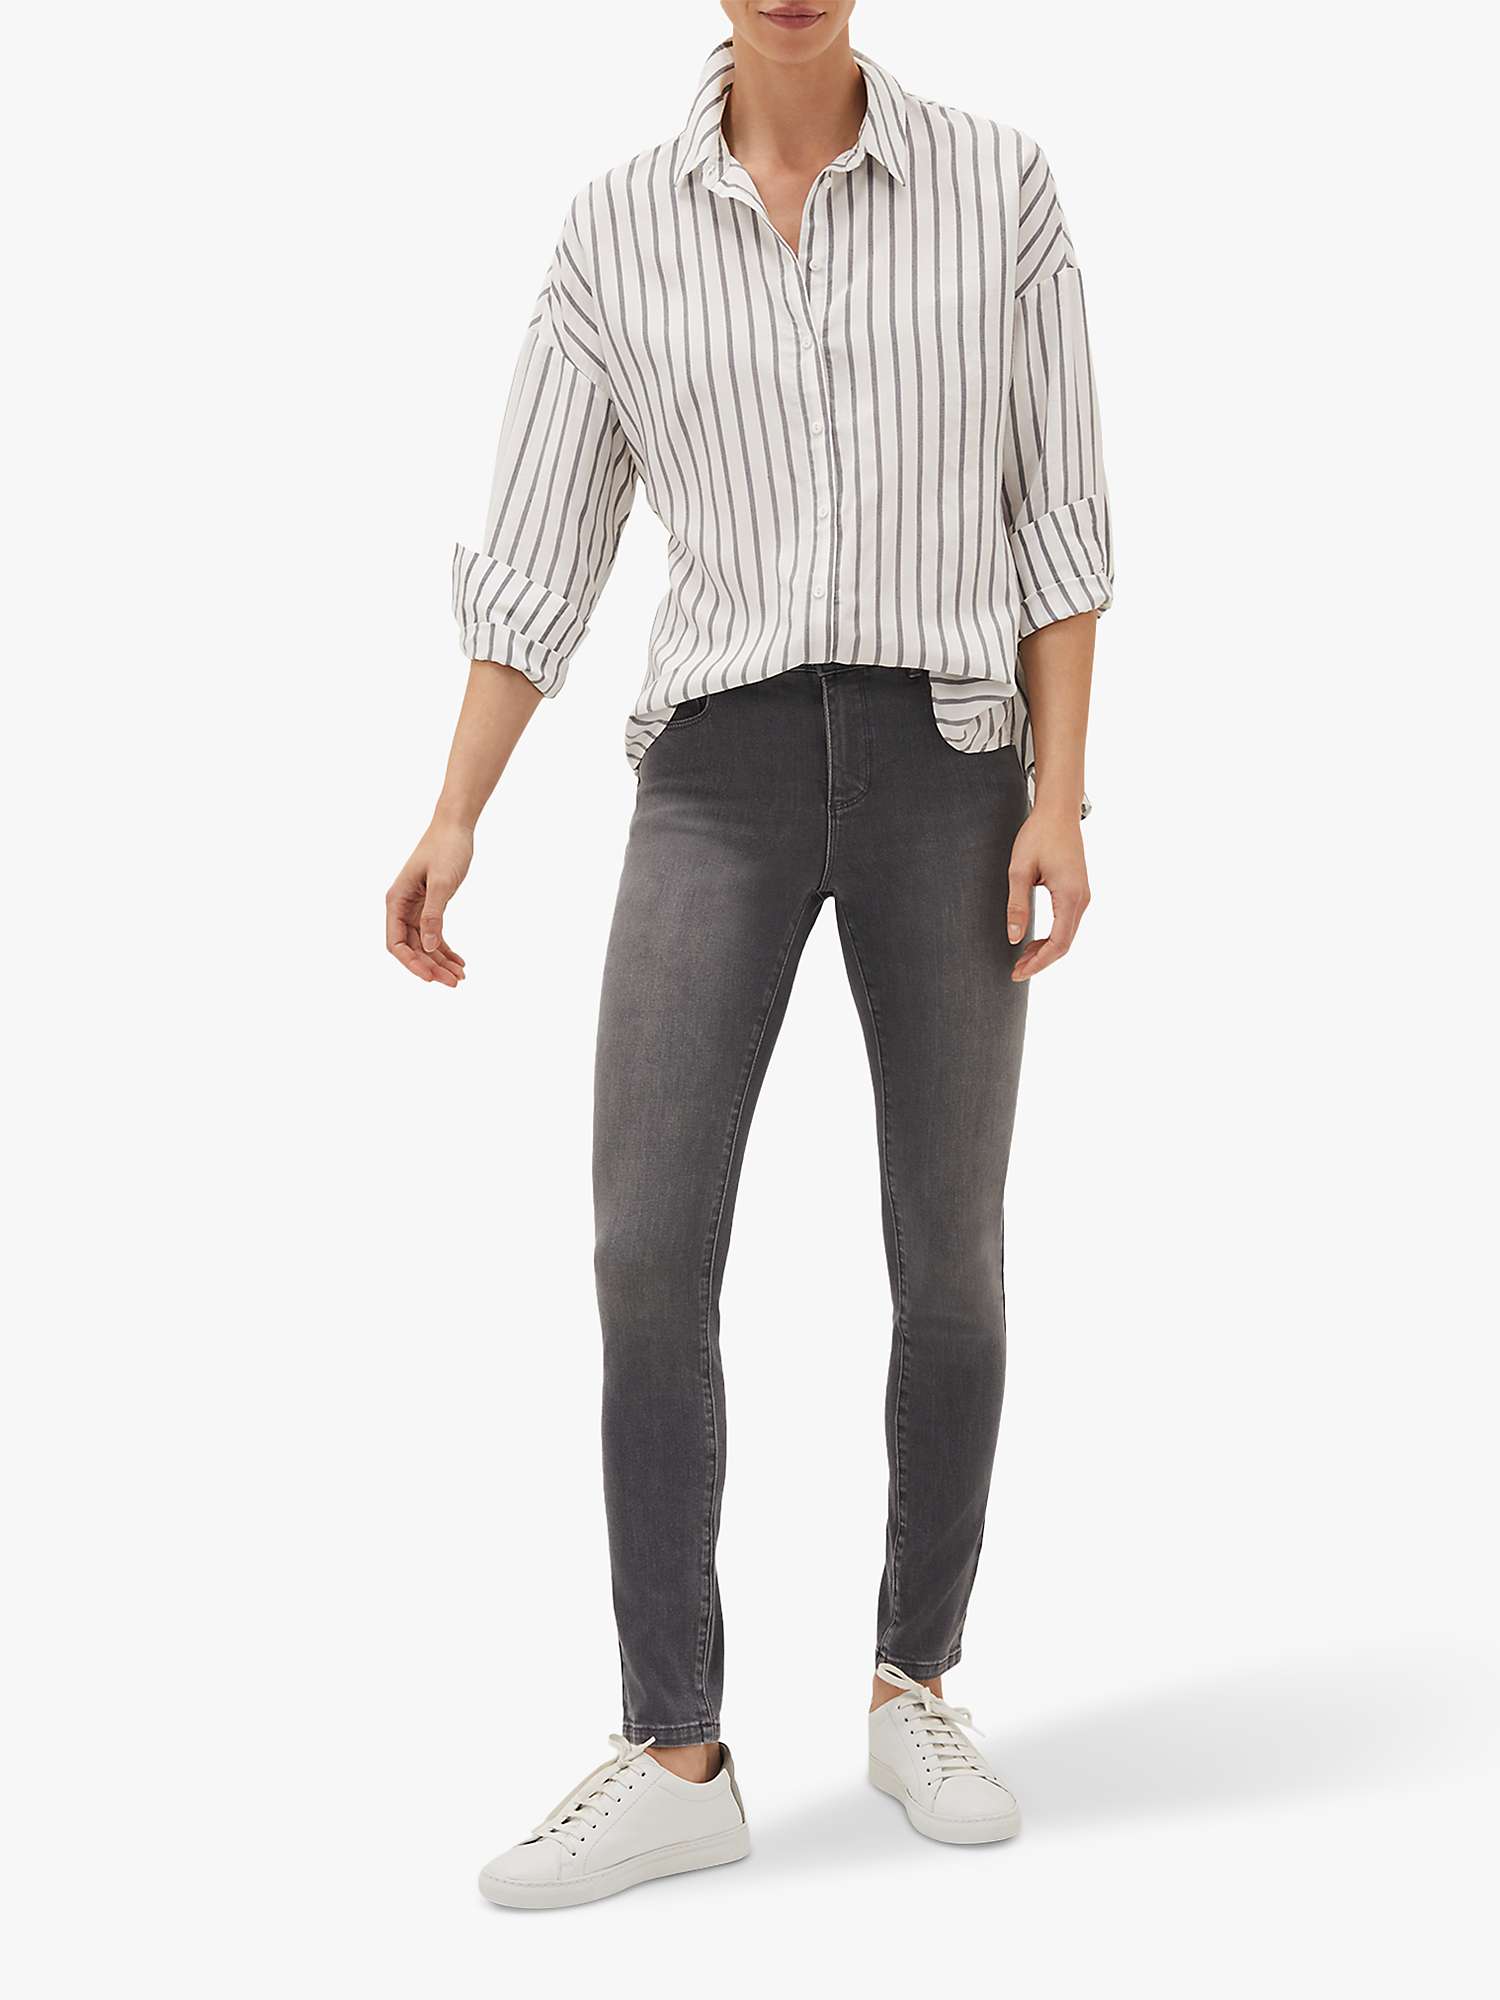 Buy Phase Eight Aida High Waisted Skinny Jeans, Grey Online at johnlewis.com